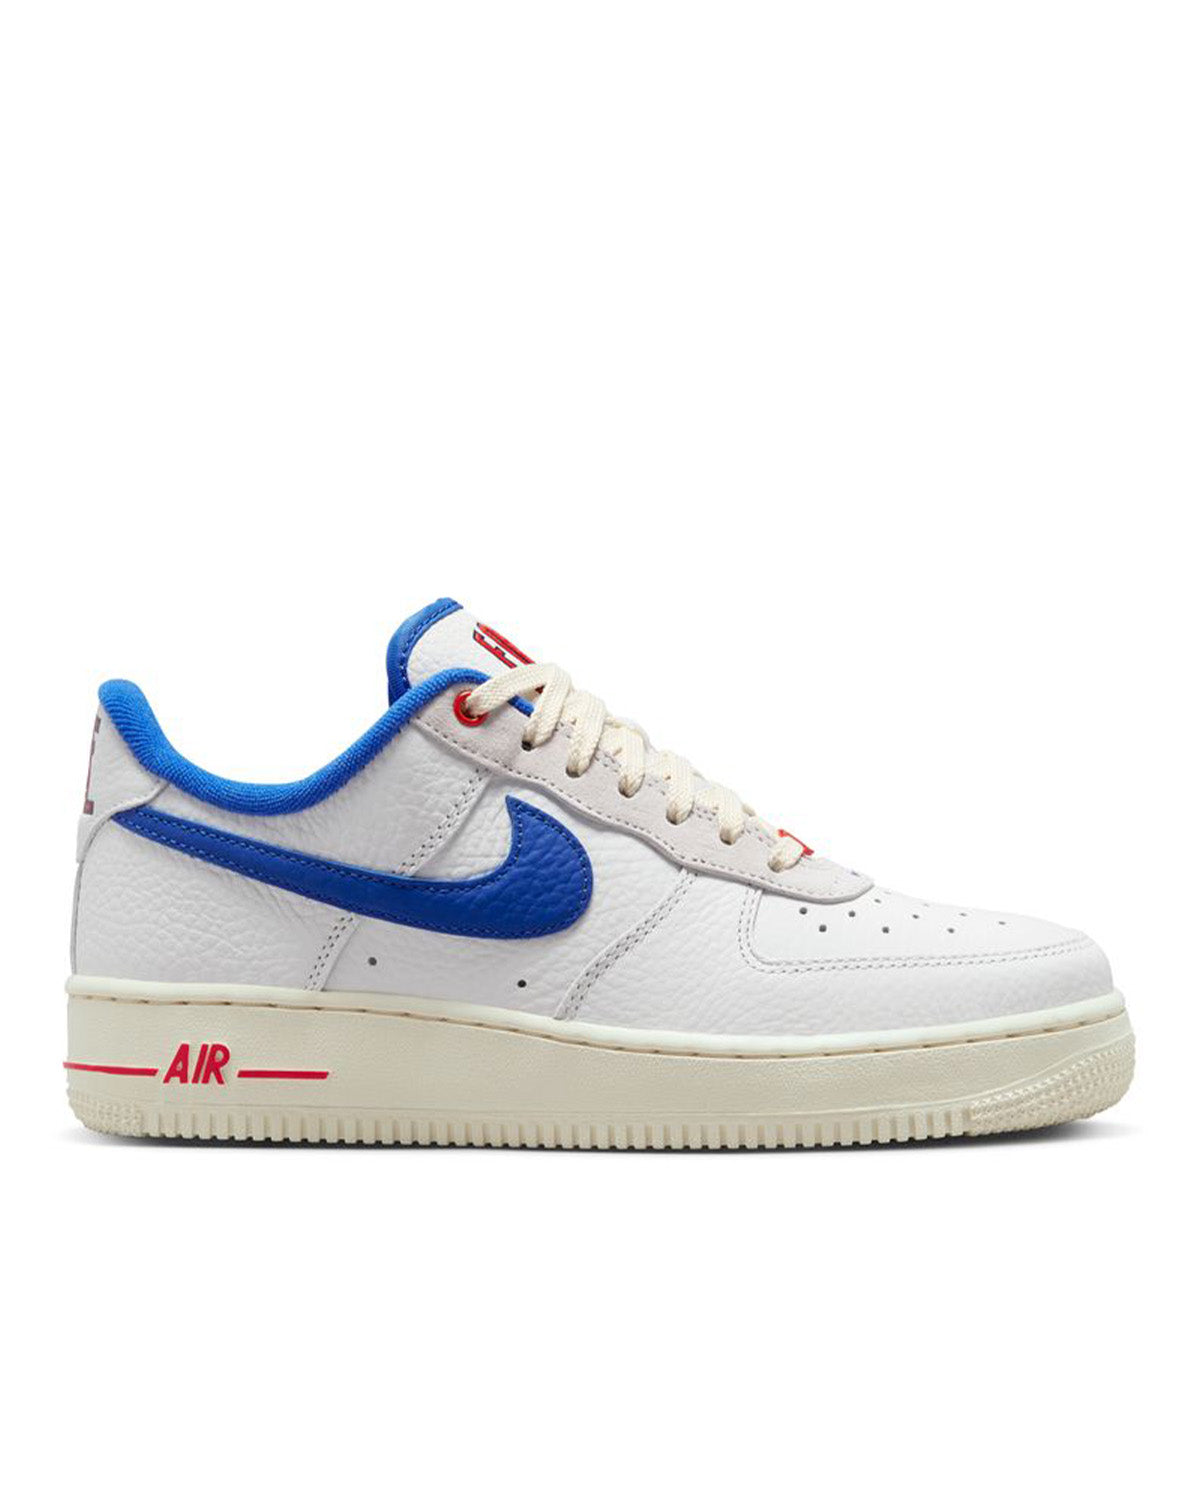 Wmns Air Force 1 '07 LX Summit White/Hyper Royal/Picante Red